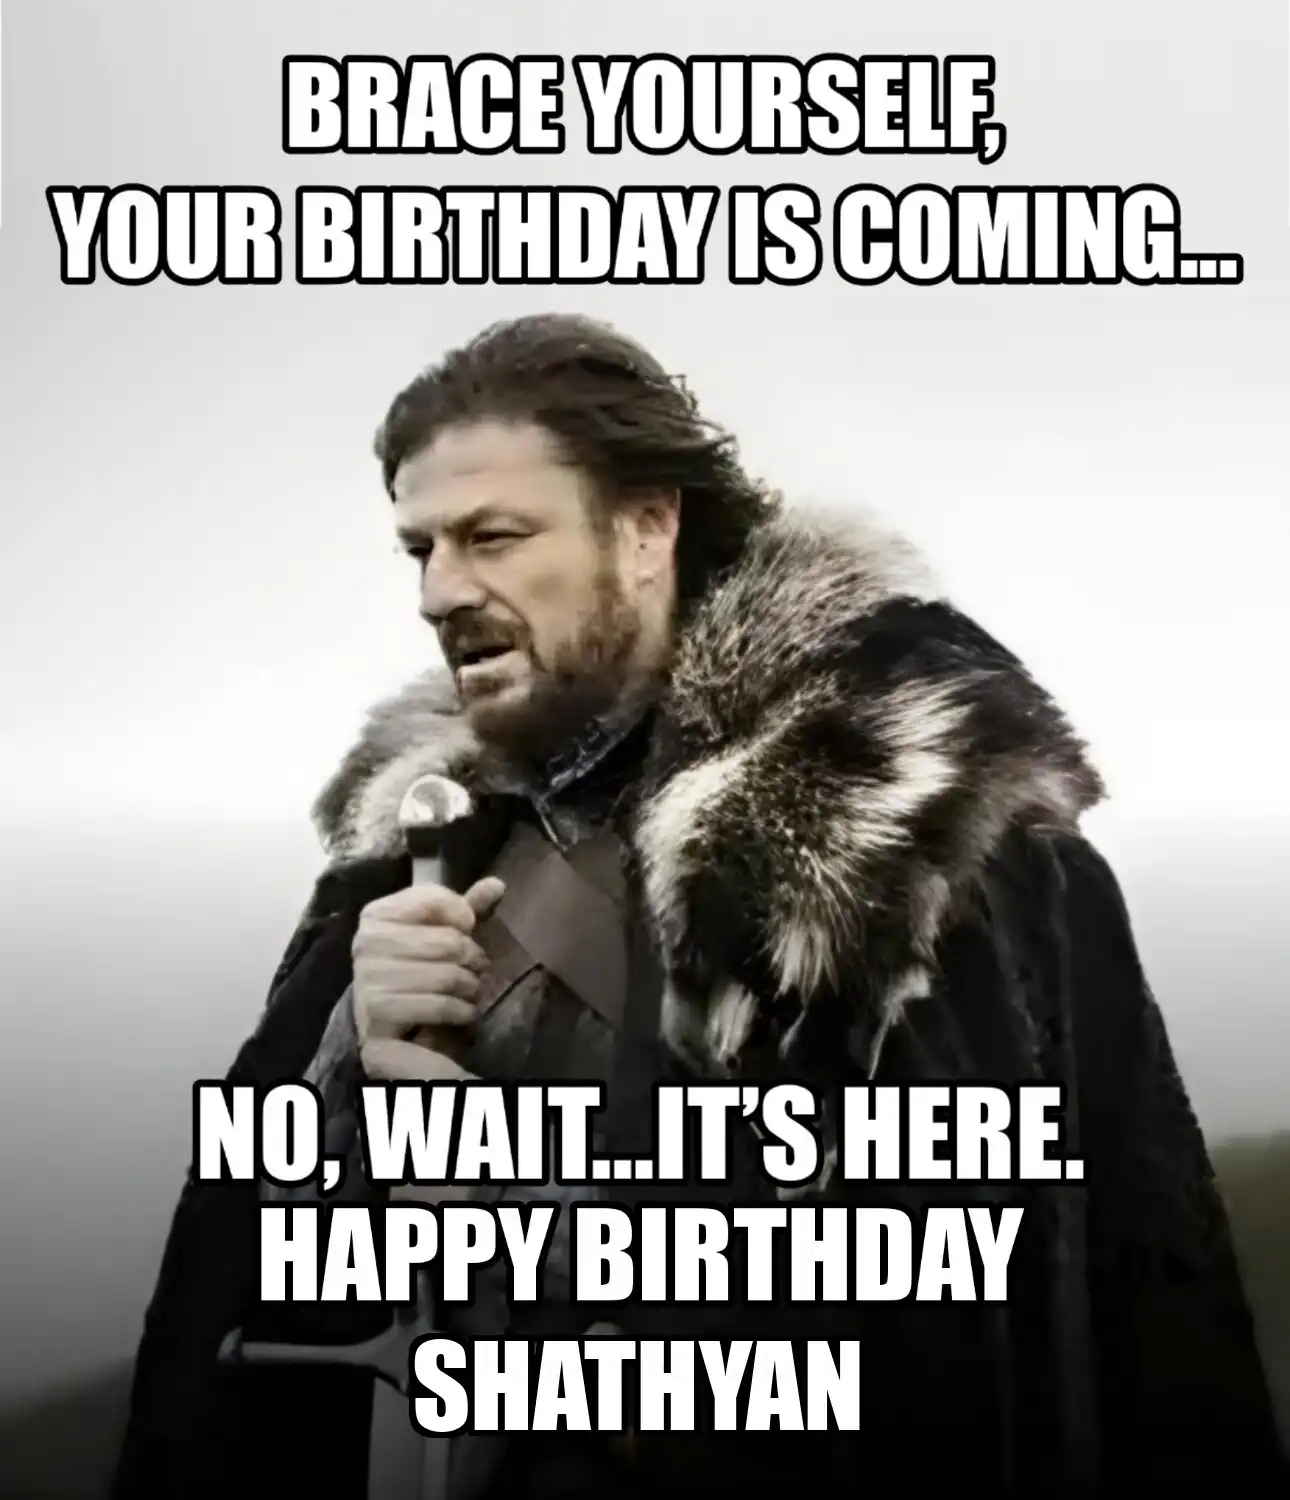 Happy Birthday Shathyan Brace Yourself Your Birthday Is Coming Meme